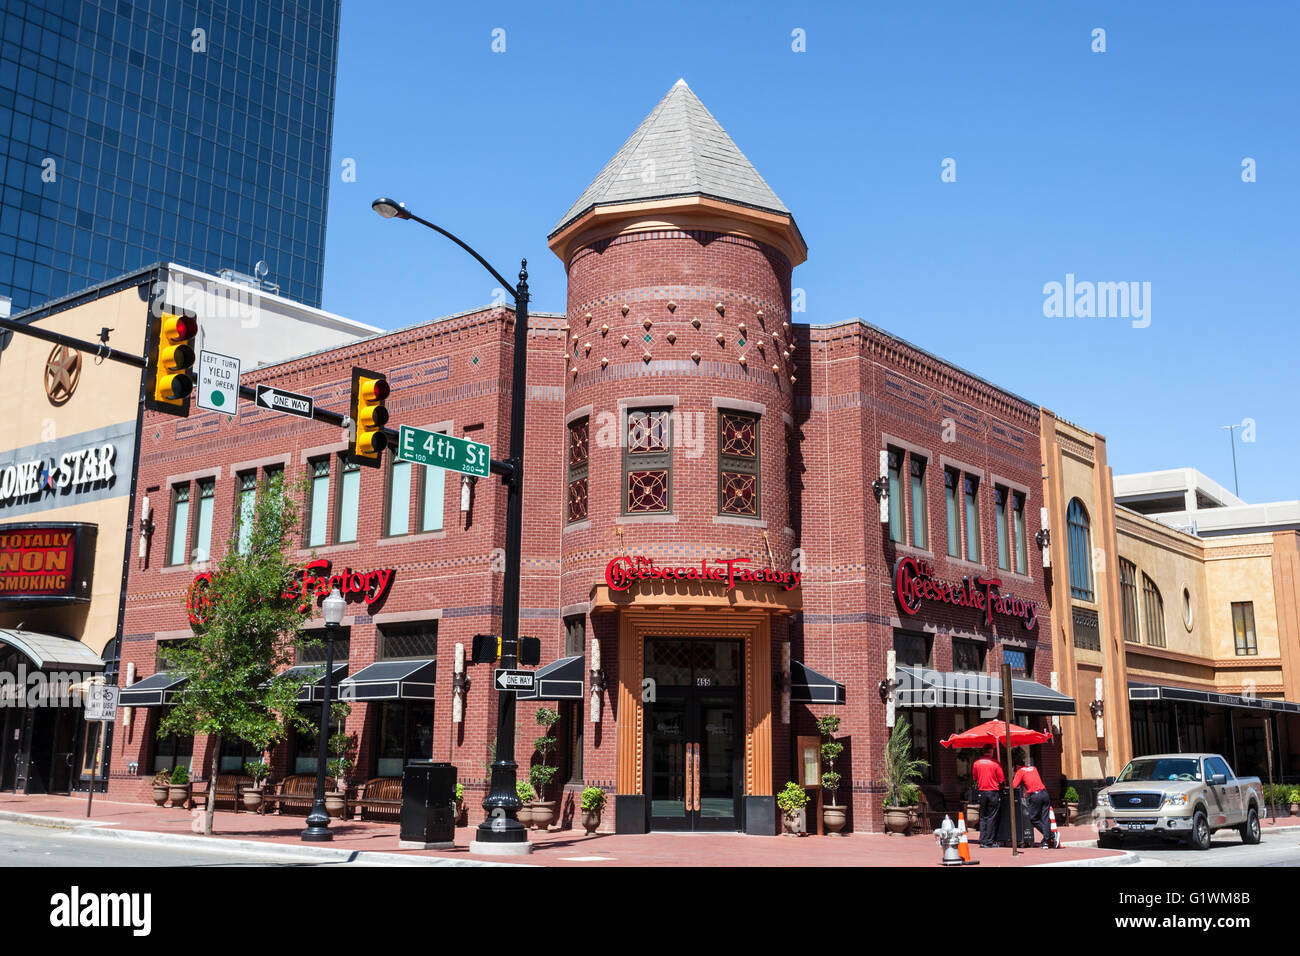 The Cheesecake Factory building downtown in Fort Worth. Texas, USA Stock Photo